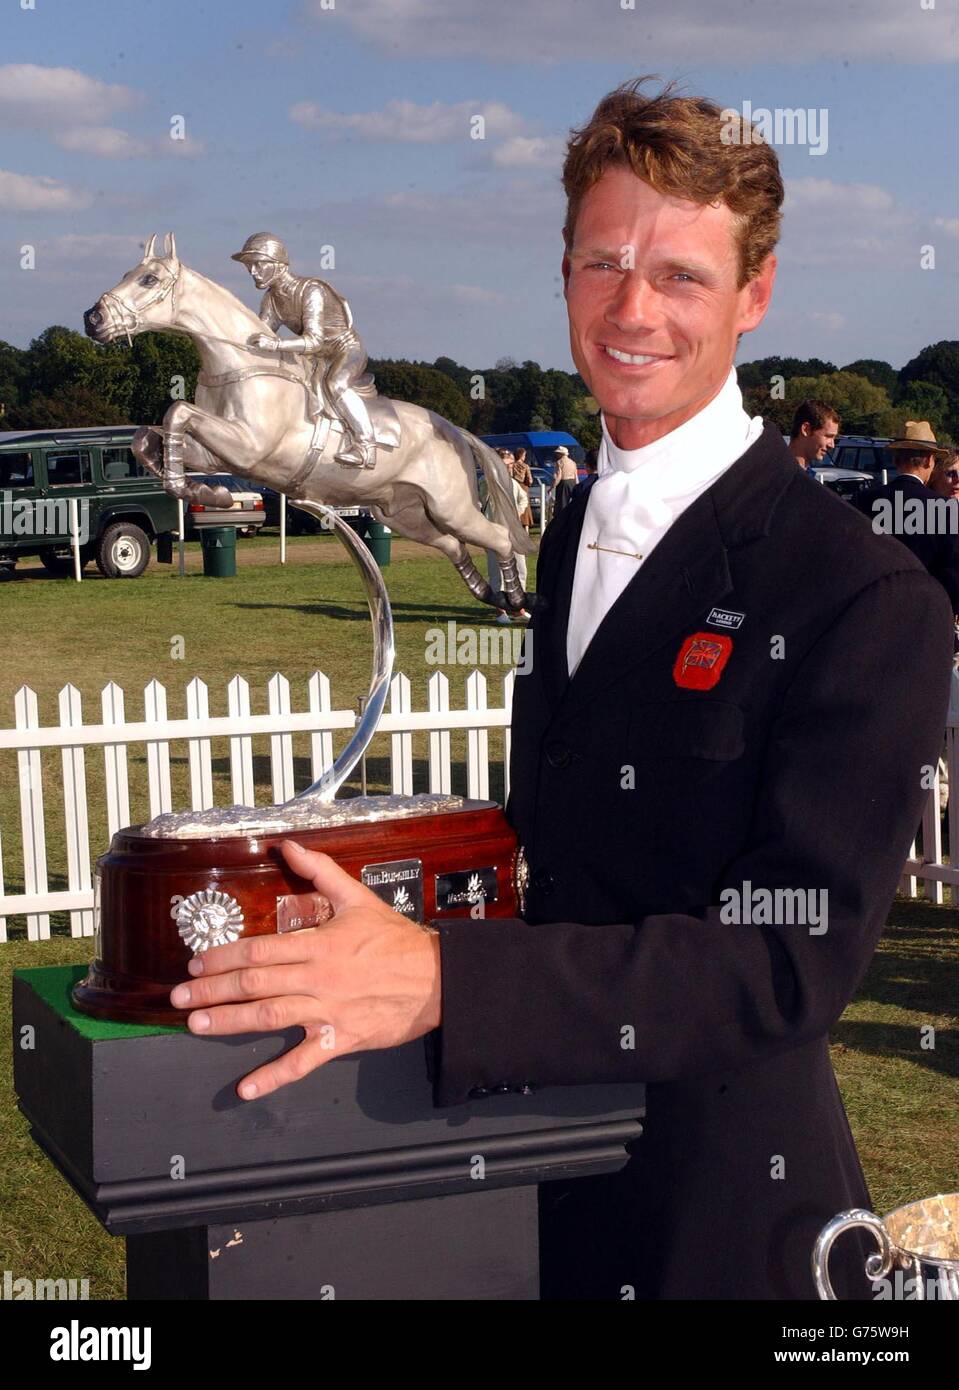 William Fox-Pitt with the Burghley Masterfoods Trophy which he won riding Highland Lad at the Burghley Horse Trials in Cambridgeshire. Stock Photo